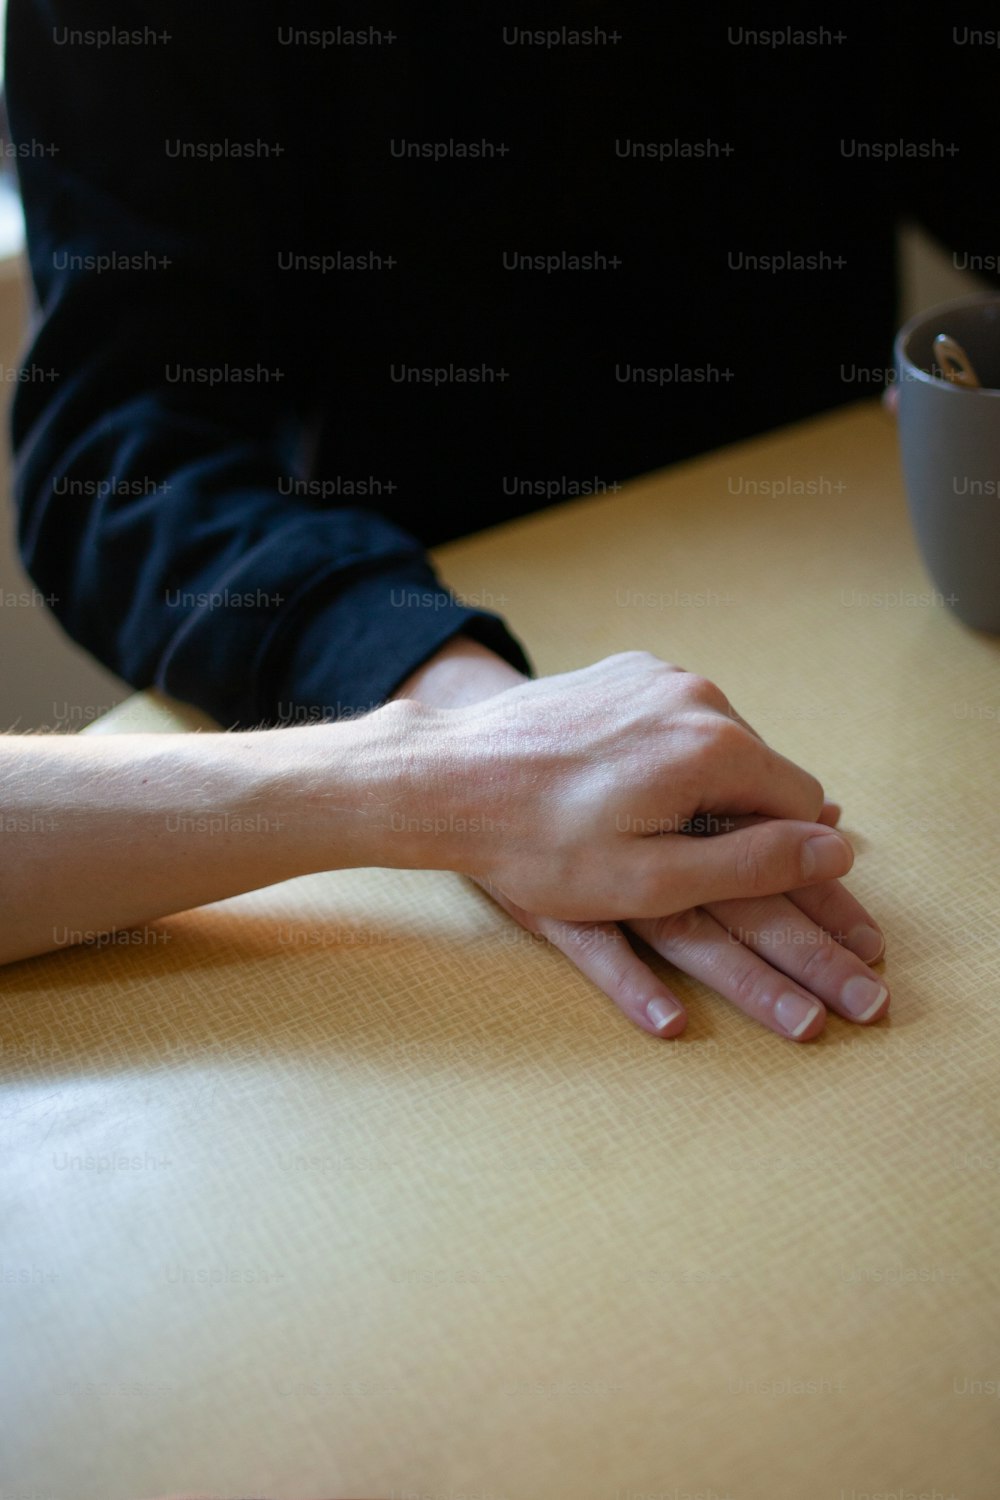 a close up of a person's hands on a table